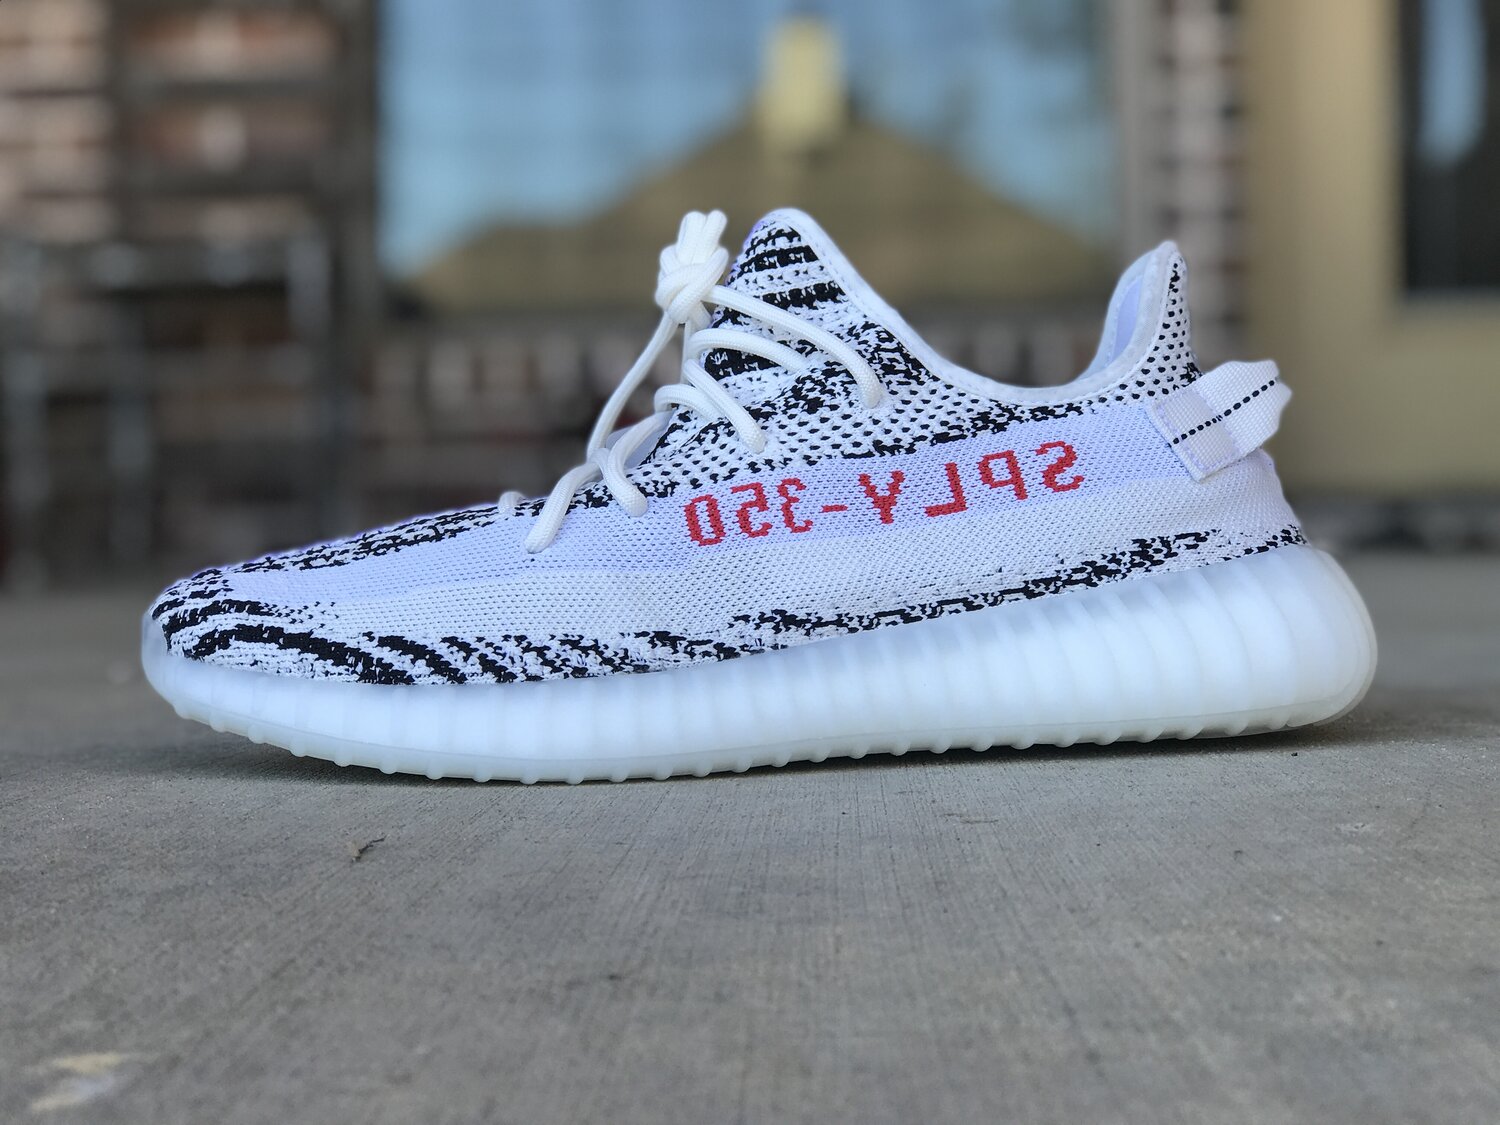 Taking A Look At The Yeezy Boost 350v2 "Zebra" [Video] The Retro